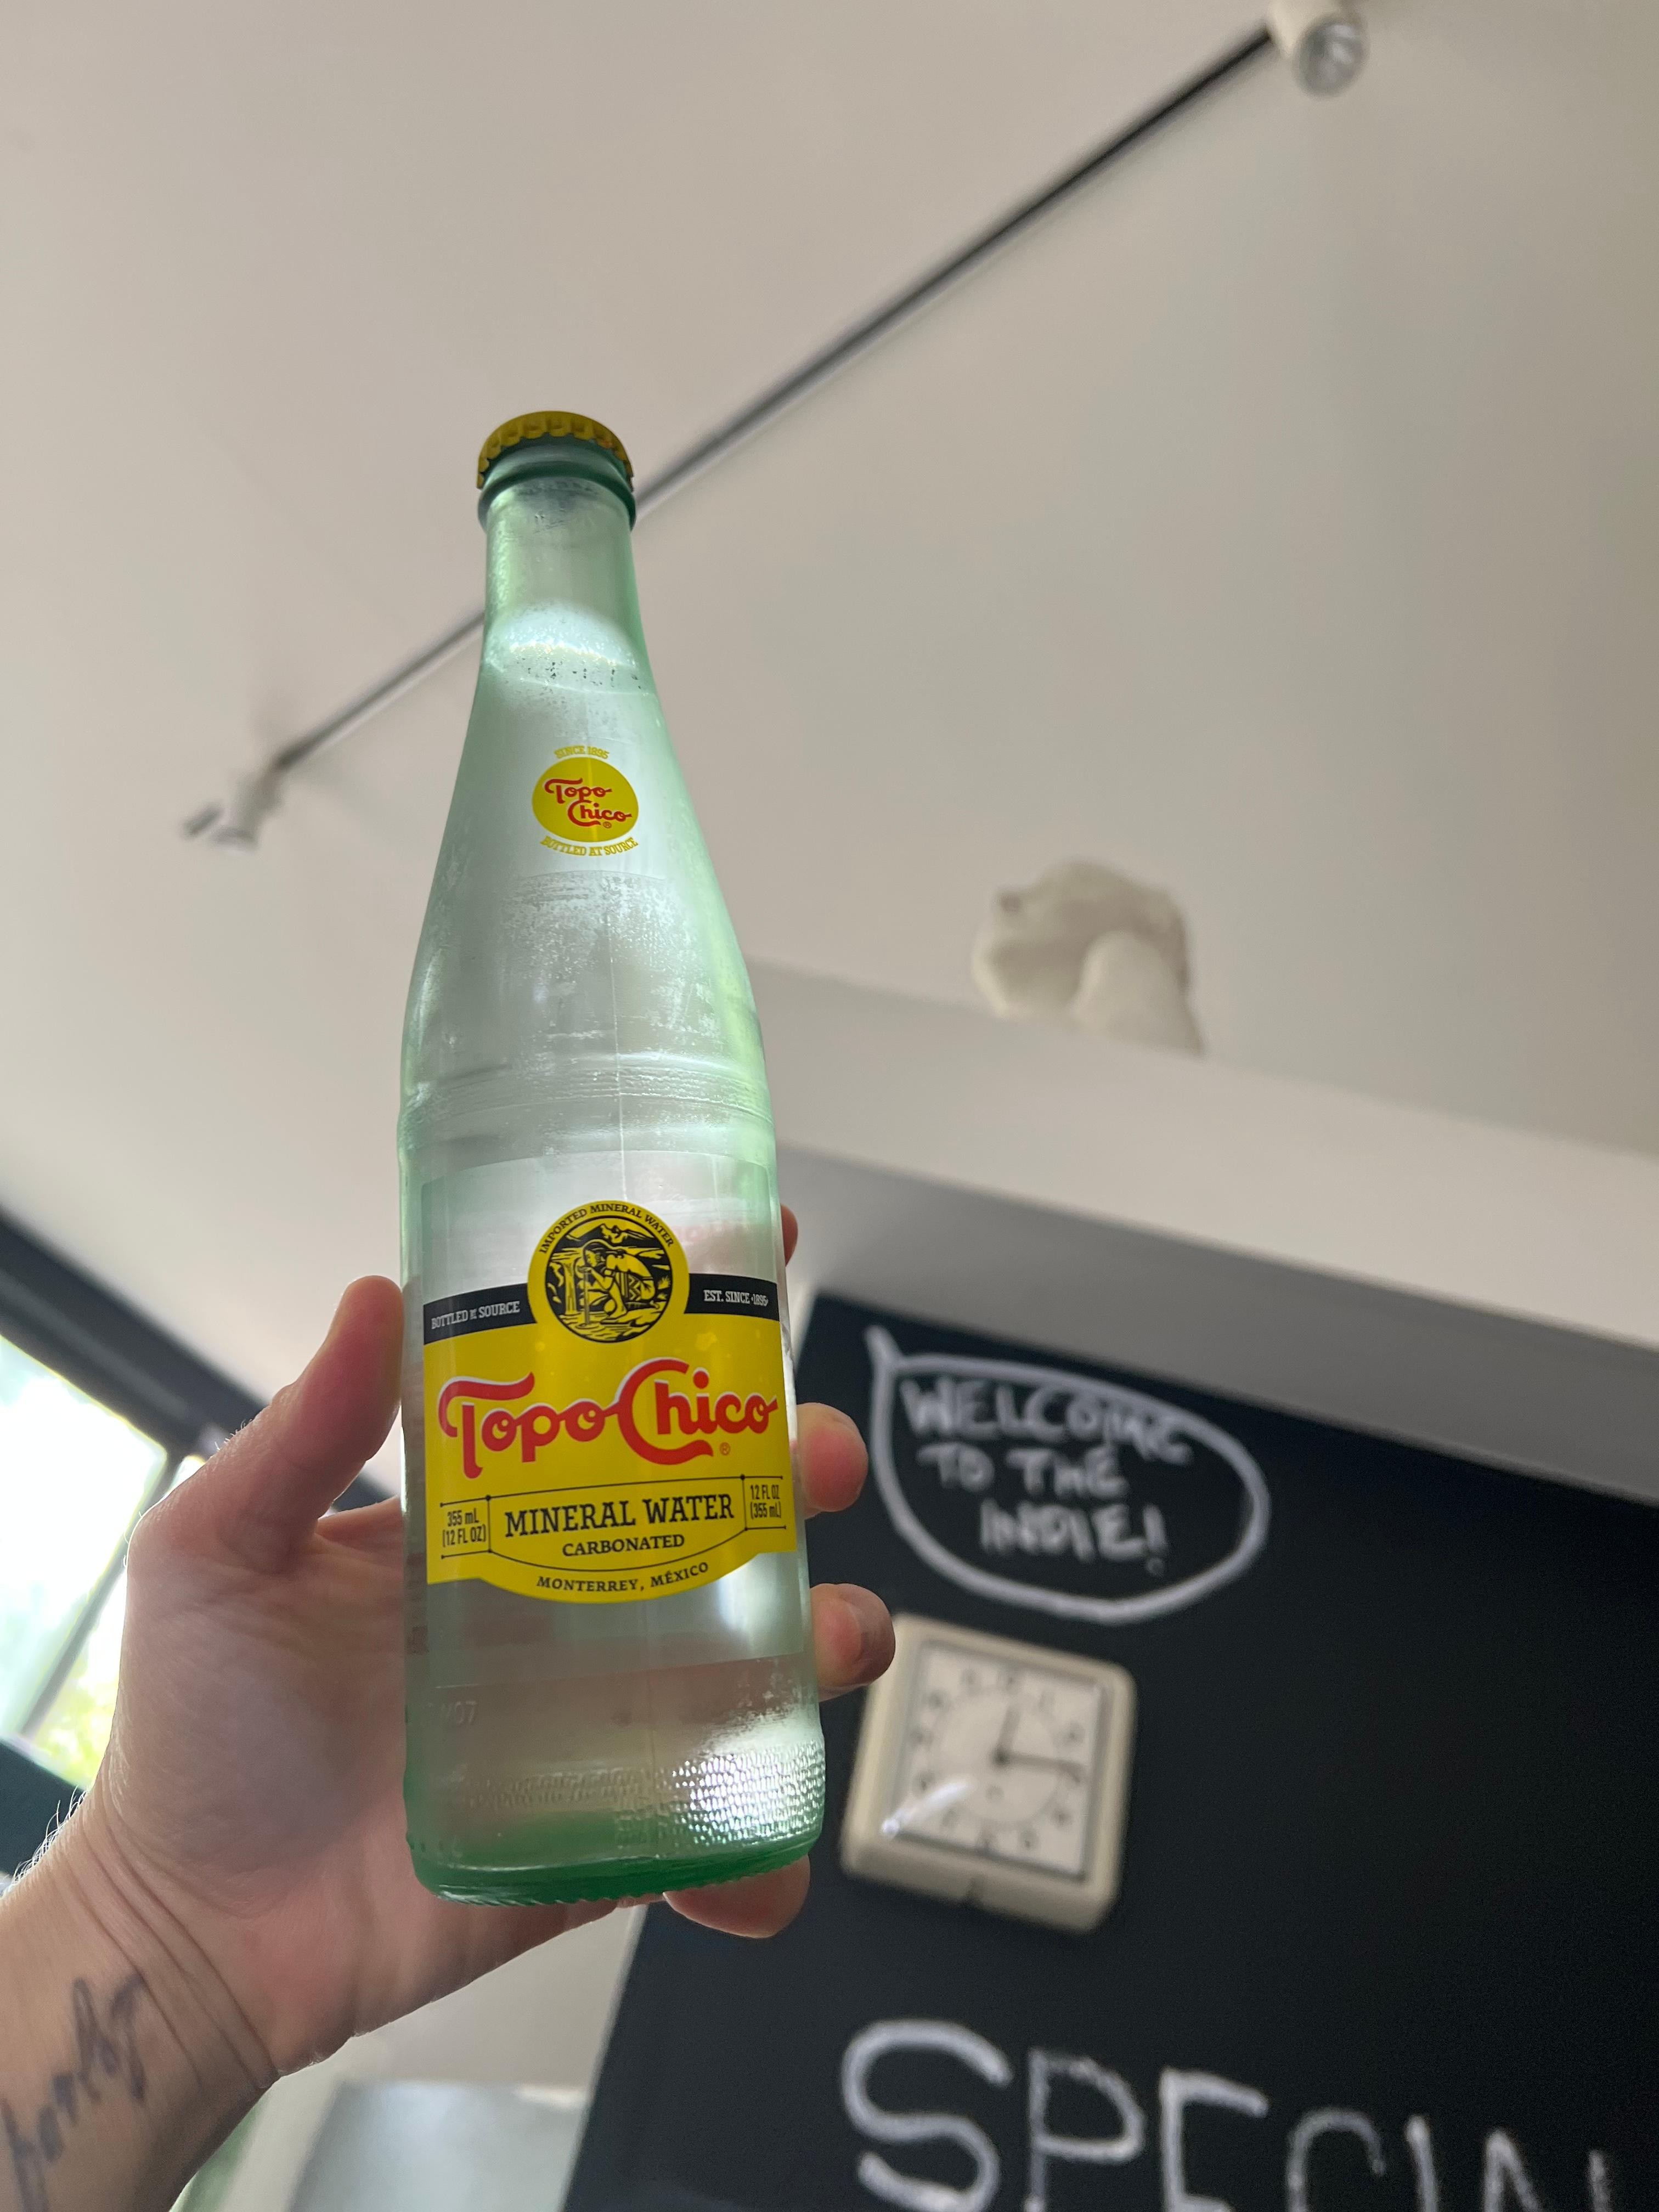 Topo Chico carbonated mineral water